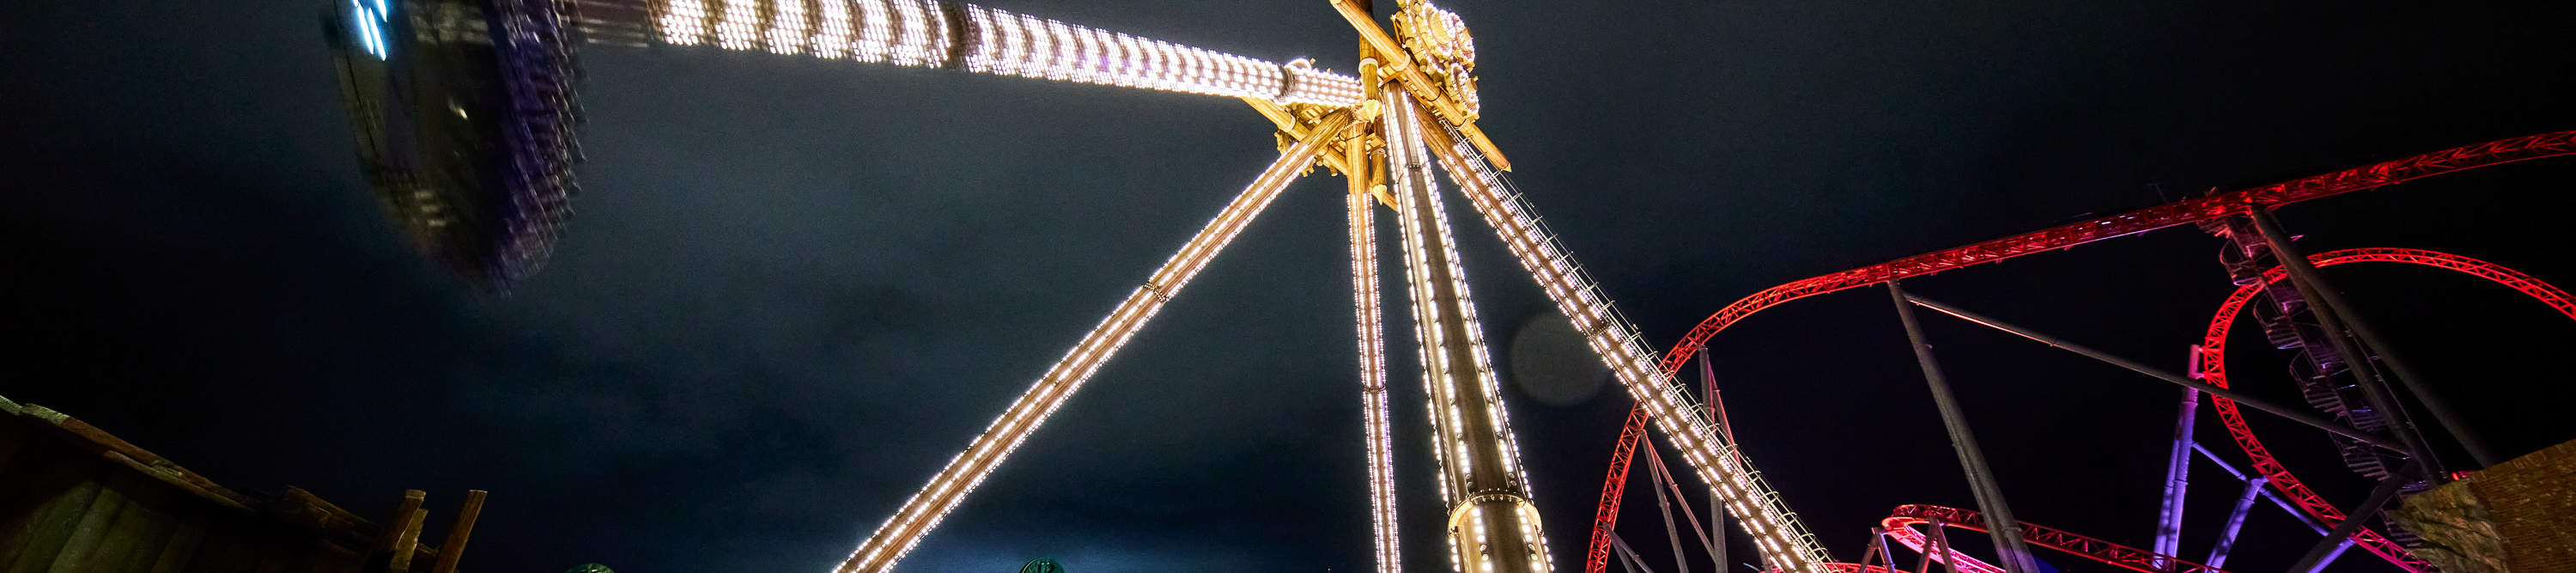 Night View of Giant Swing